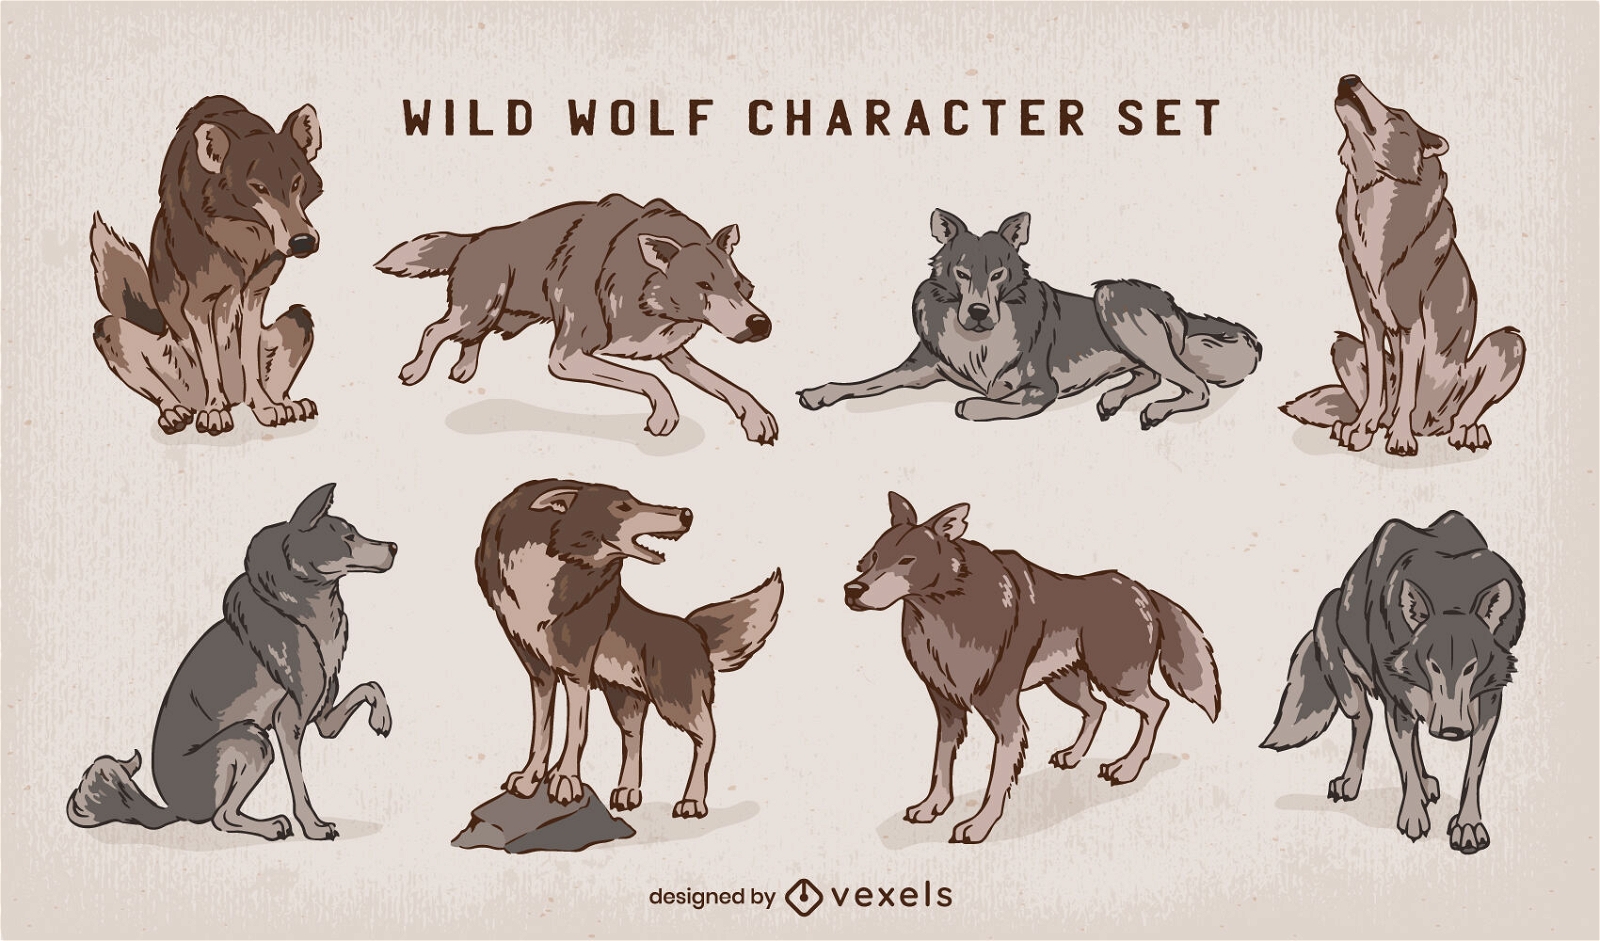 Wild wolf character set